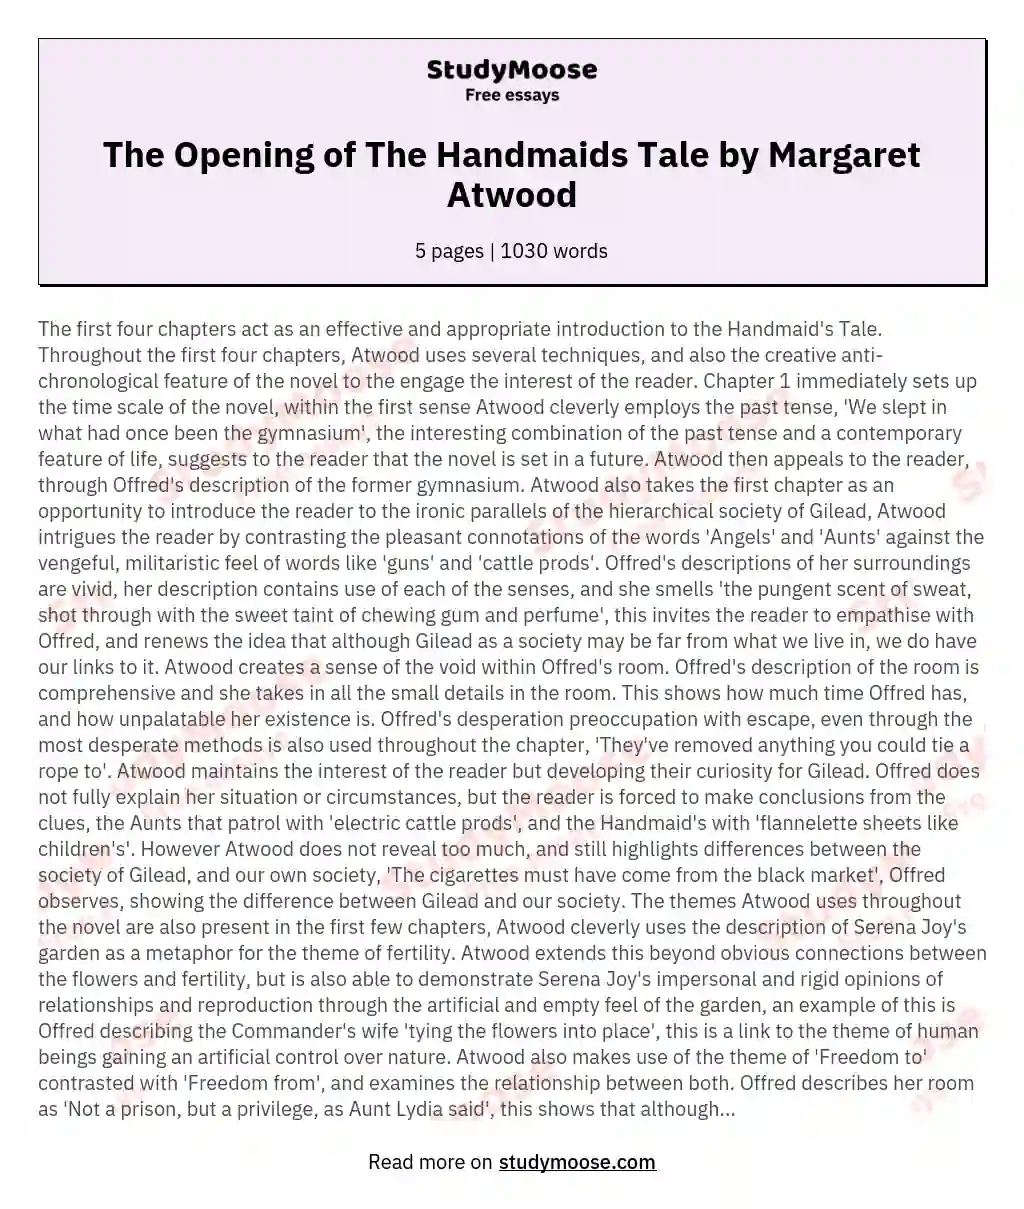 The Opening of The Handmaids Tale by Margaret Atwood